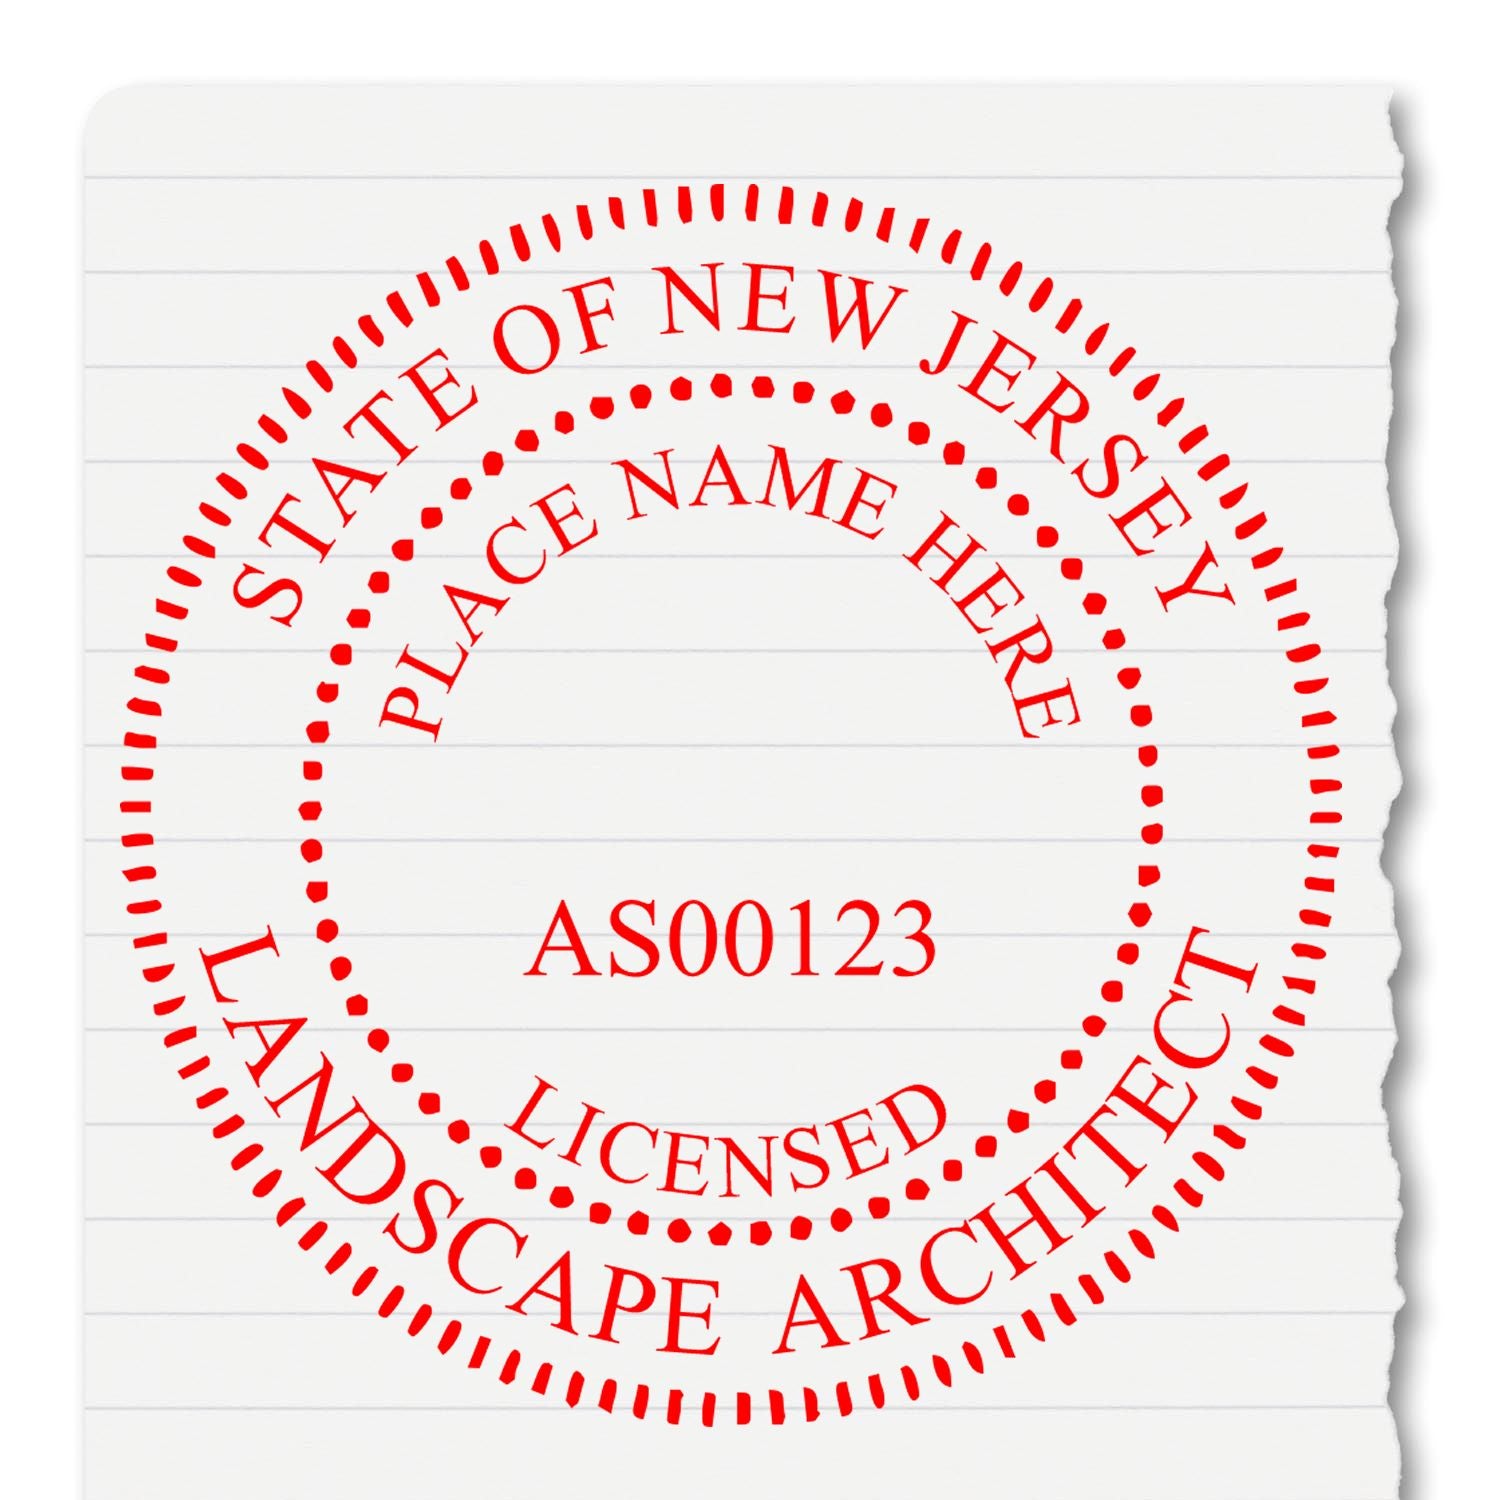 The main image for the New Jersey Landscape Architectural Seal Stamp depicting a sample of the imprint and electronic files